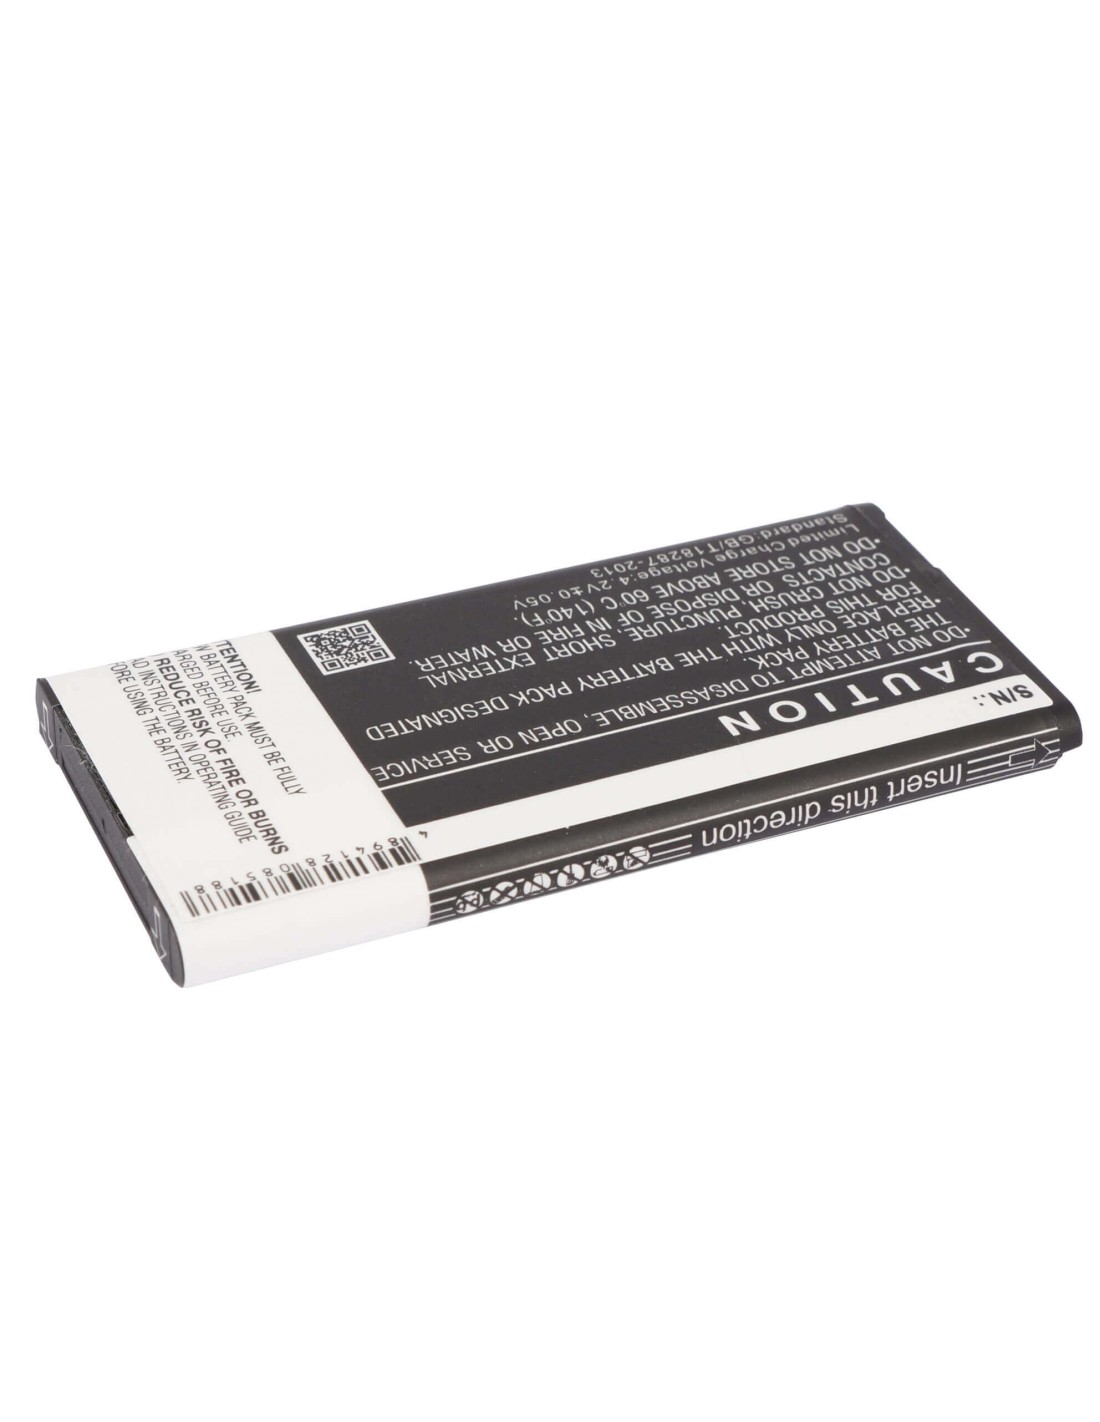 Battery for Nokia X, X+, A110 3.7V, 1500mAh - 5.55Wh